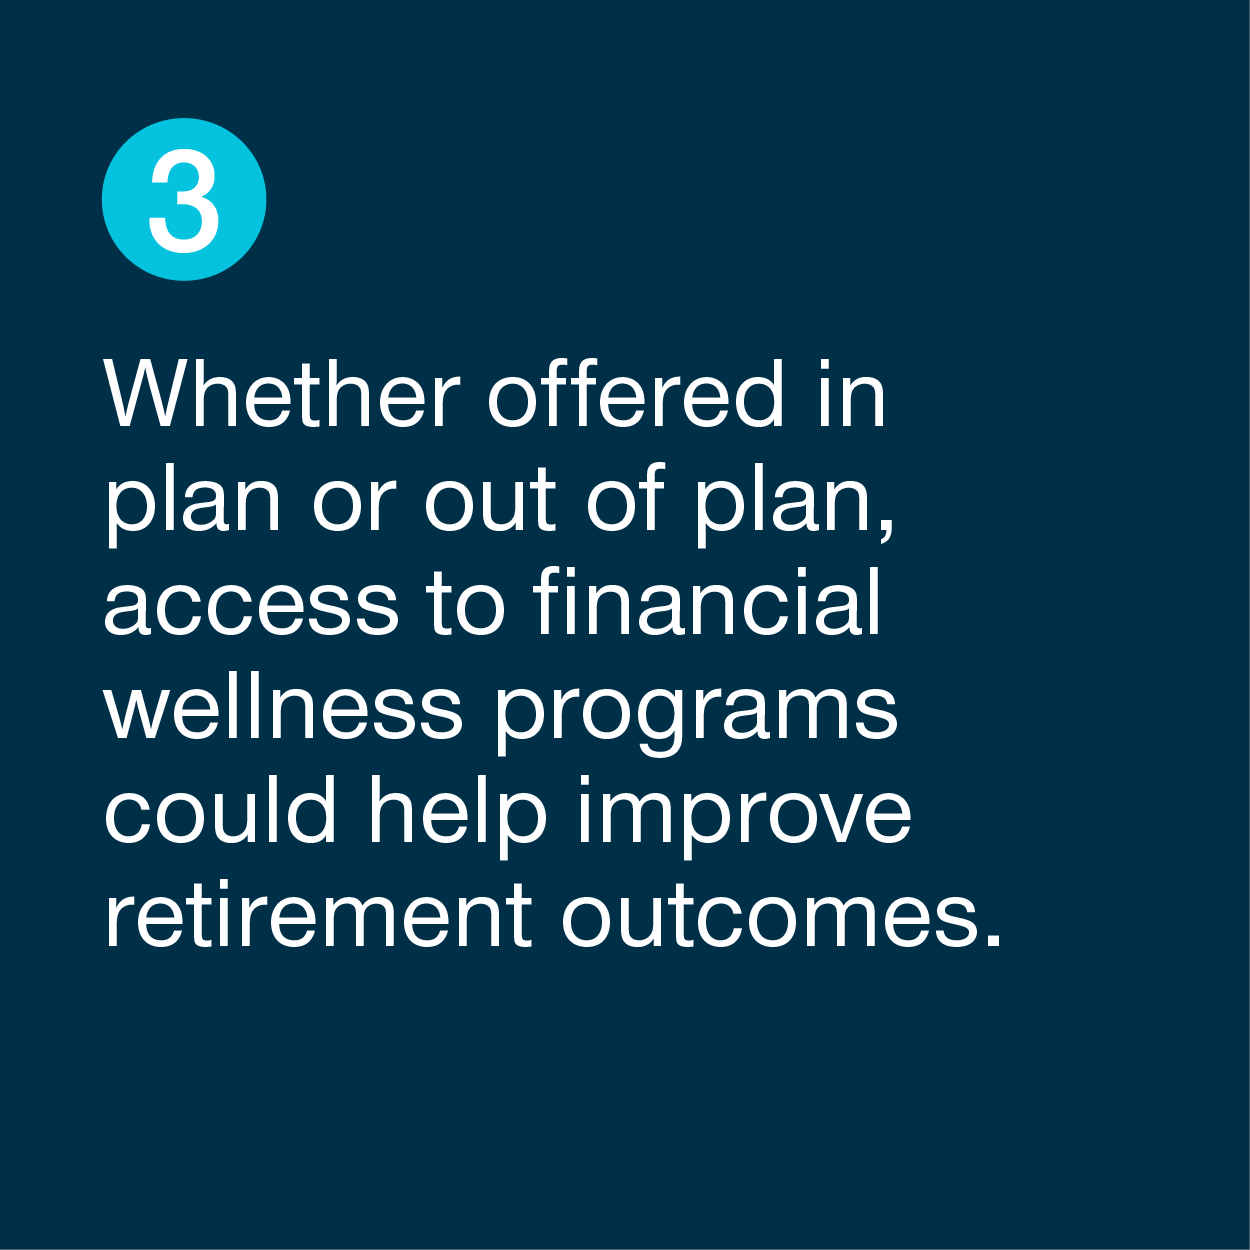 Whether offered in plan or out of plan, access to financial wellness programs could help improve retirement outcomes